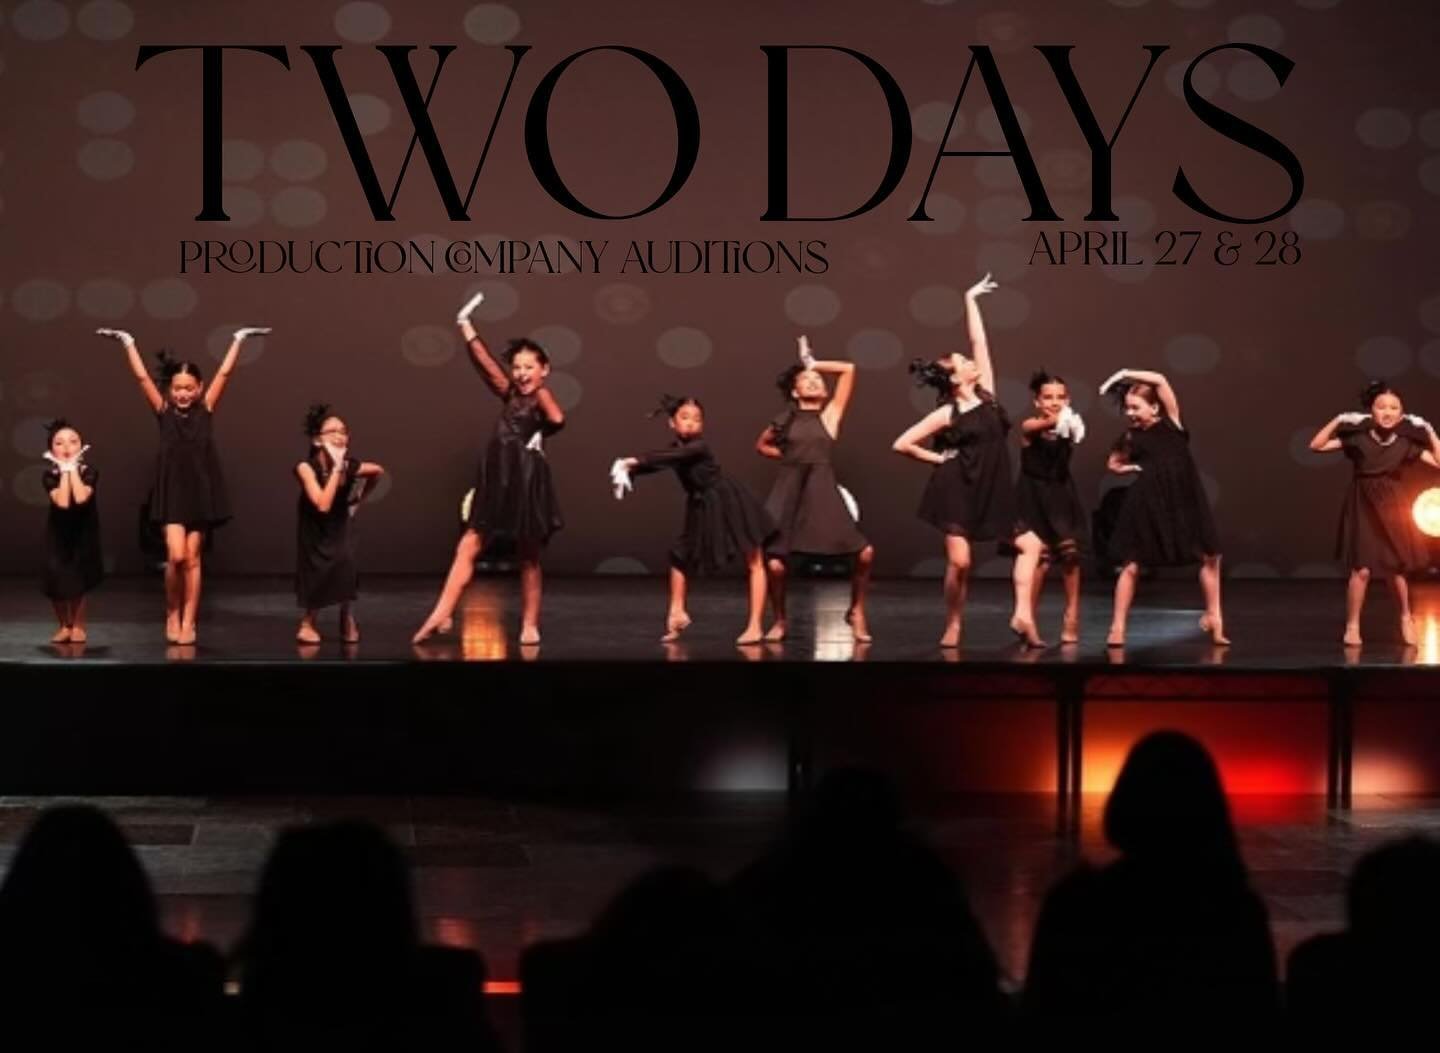 Just two more days until auditions! Be sure to turn your audition forms in at the studio by 7 pm on Friday.  #elitestudioofdance #competitivedance #proco #auditions #elkgrovedance